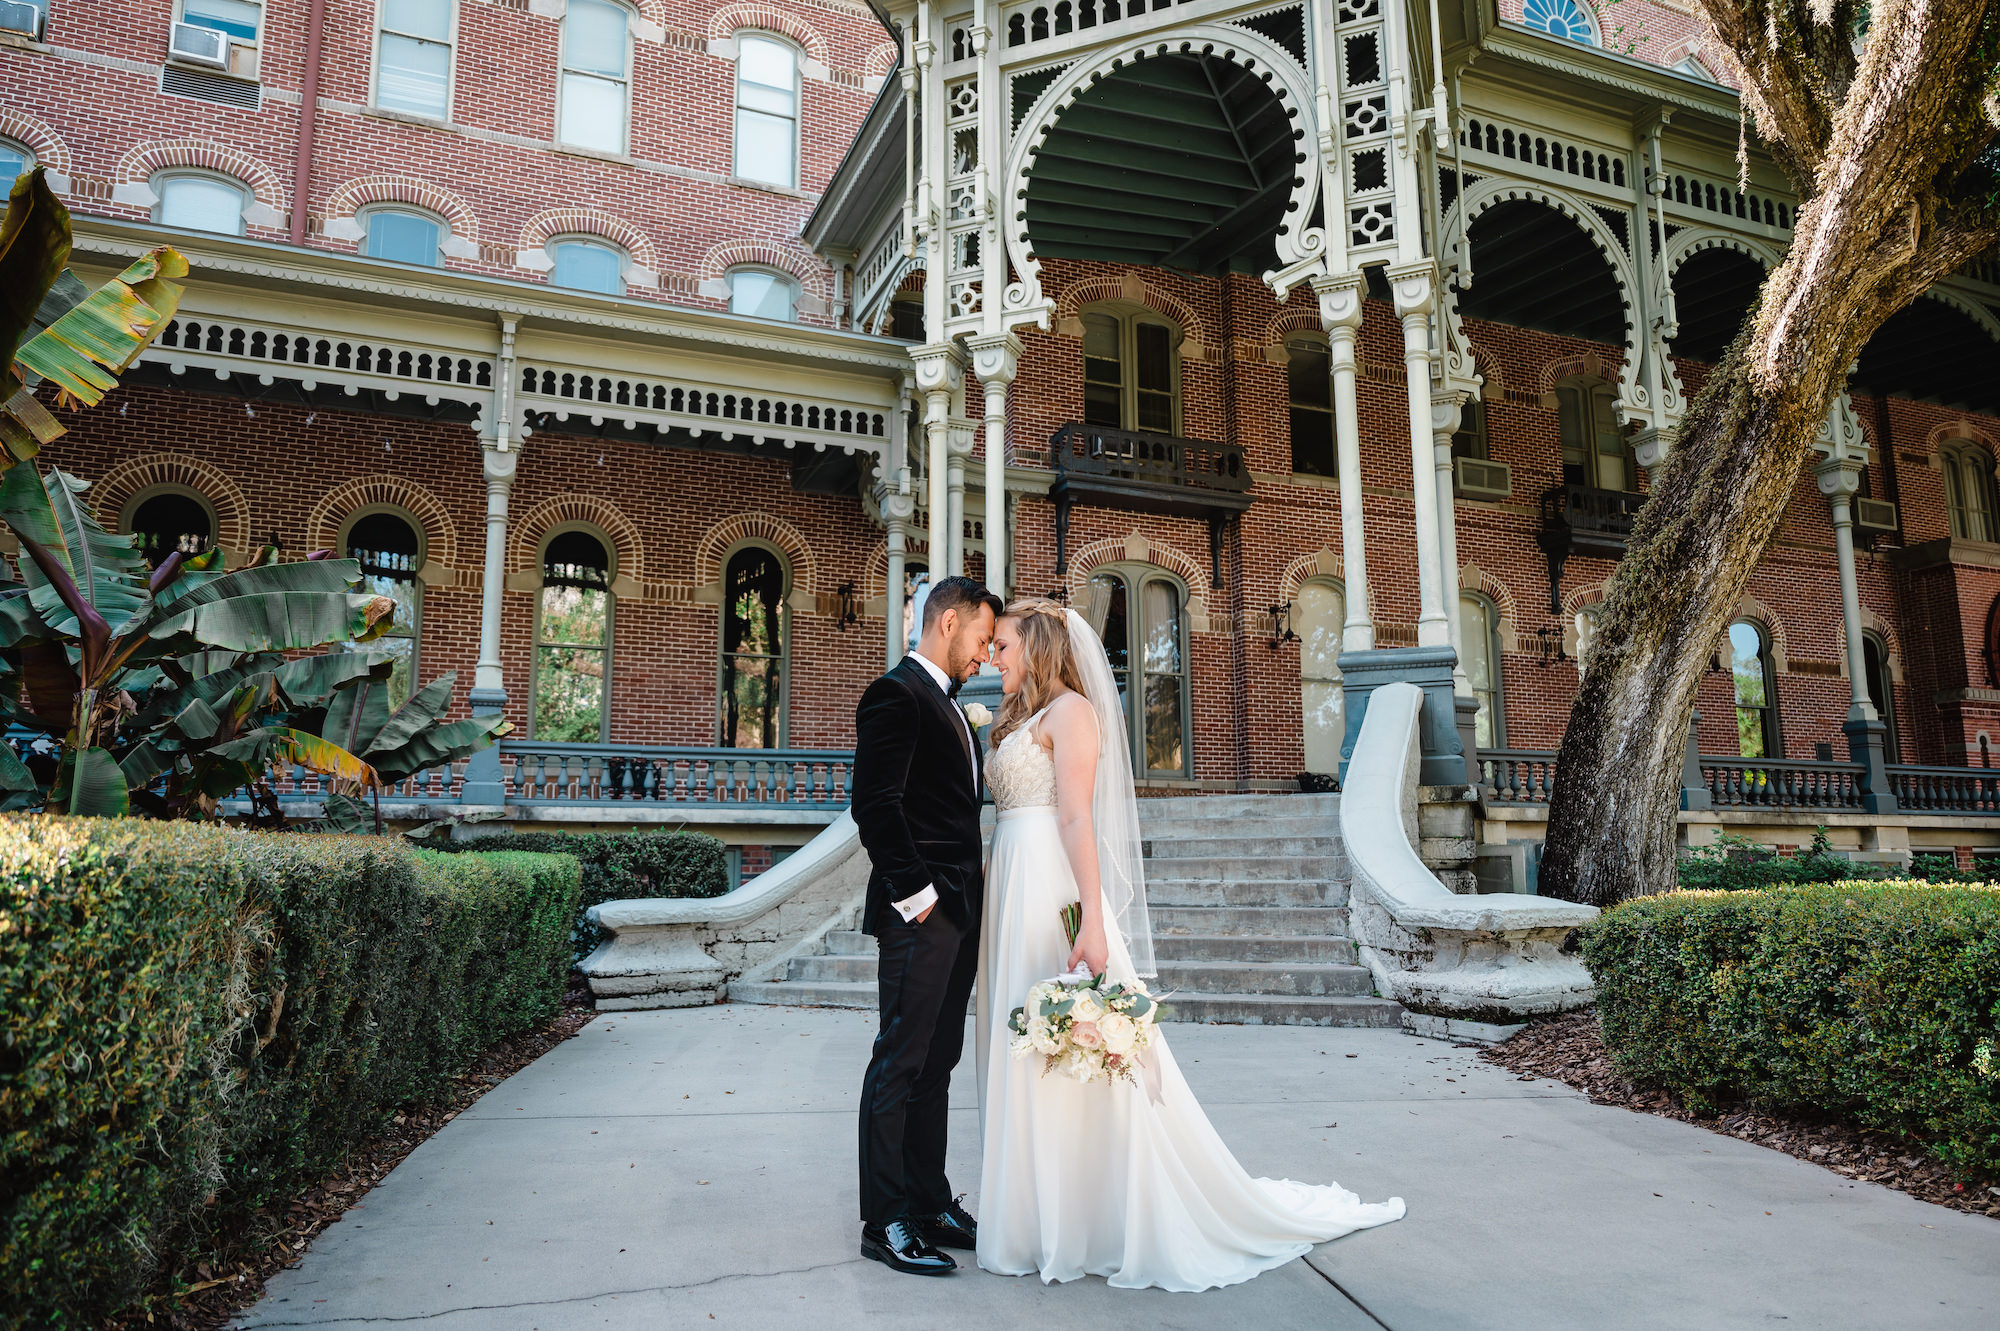 Romantic Bride and Groom First Look | Tampa Bay Wedding Photographer and Videographer Iyrus Weddings